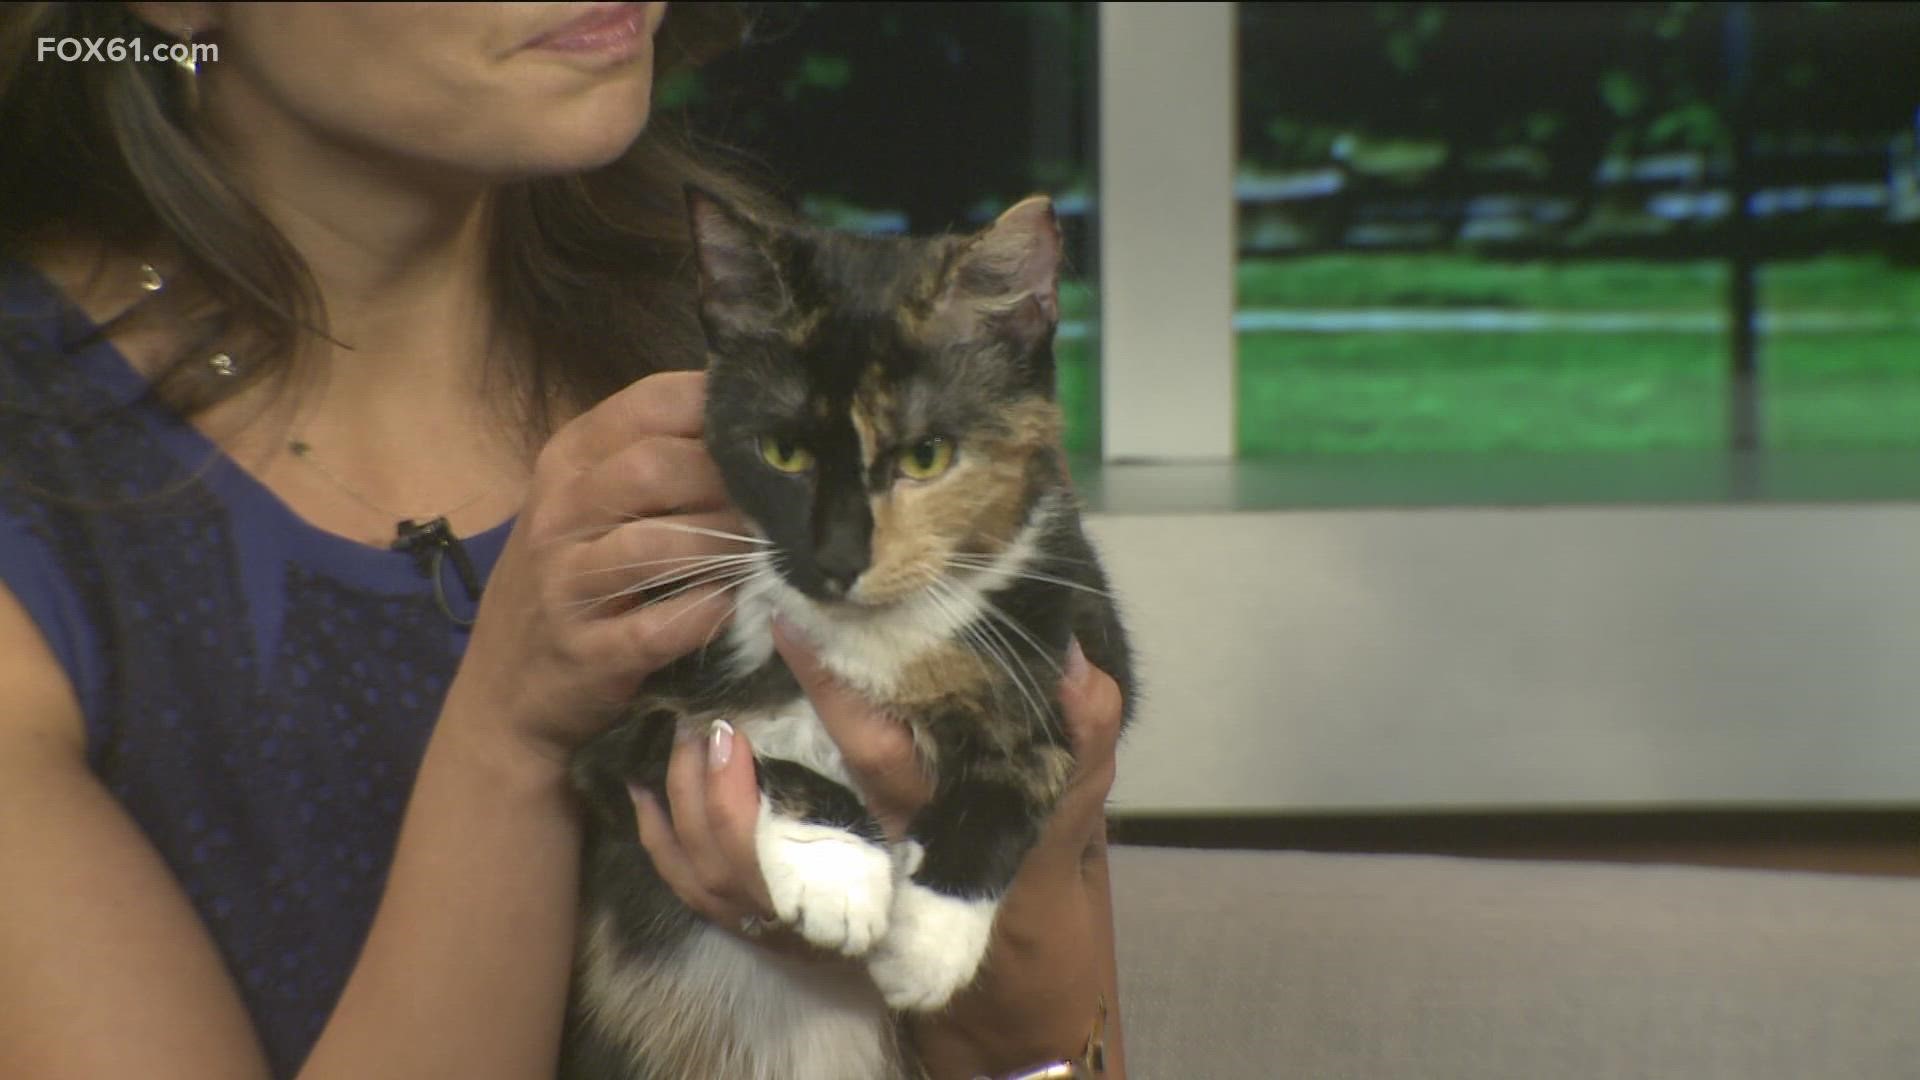 Duchess is a nine-month-old at the Connecticut Humane Society who is looking for a home.